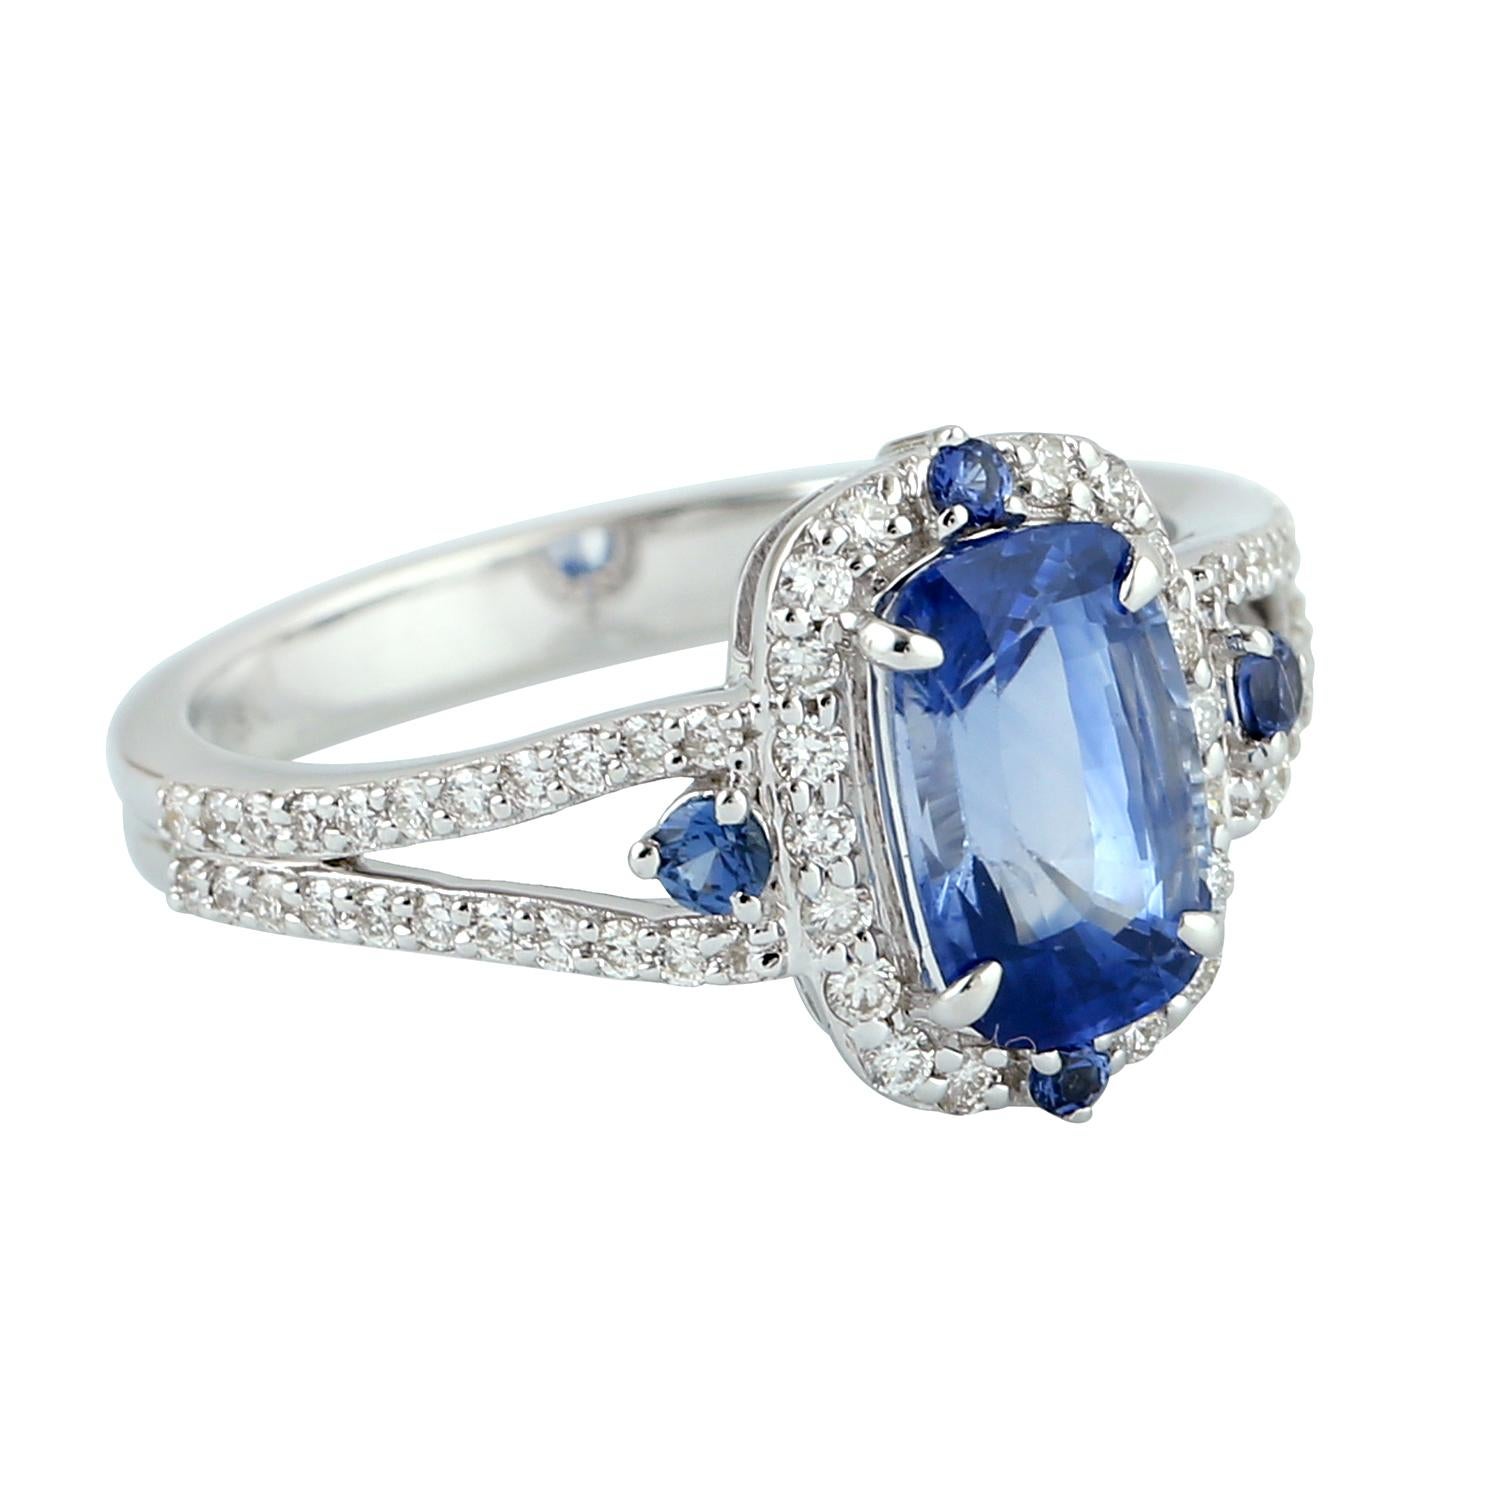 Mixed Cut Blue Sapphire Cocktail Ring With Pave Diamonds Made In 18k White Gold For Sale